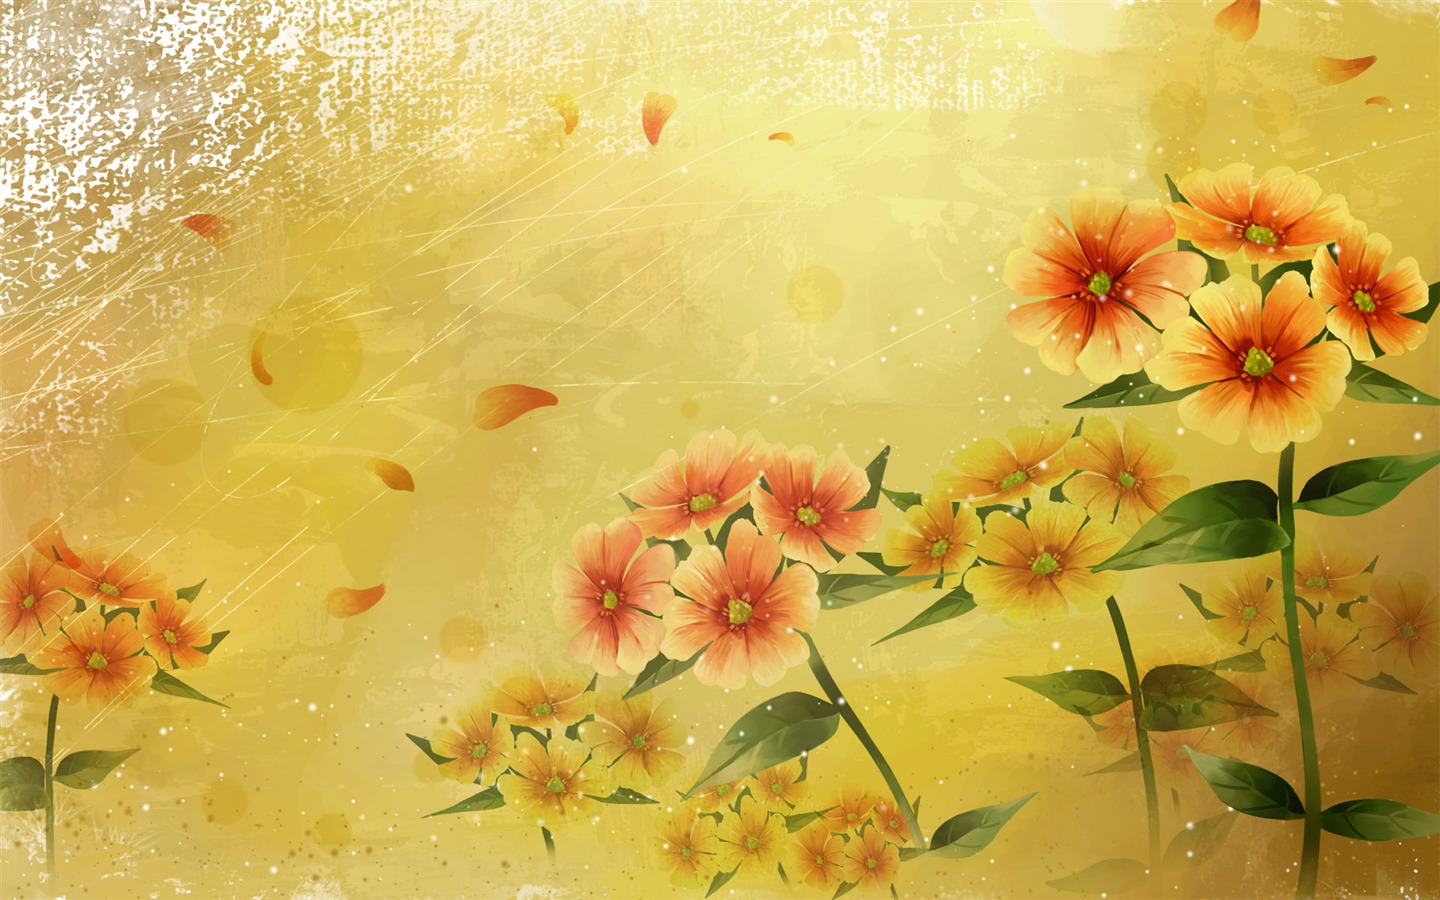 Synthetic Wallpaper Colorful Flower #33 - 1440x900